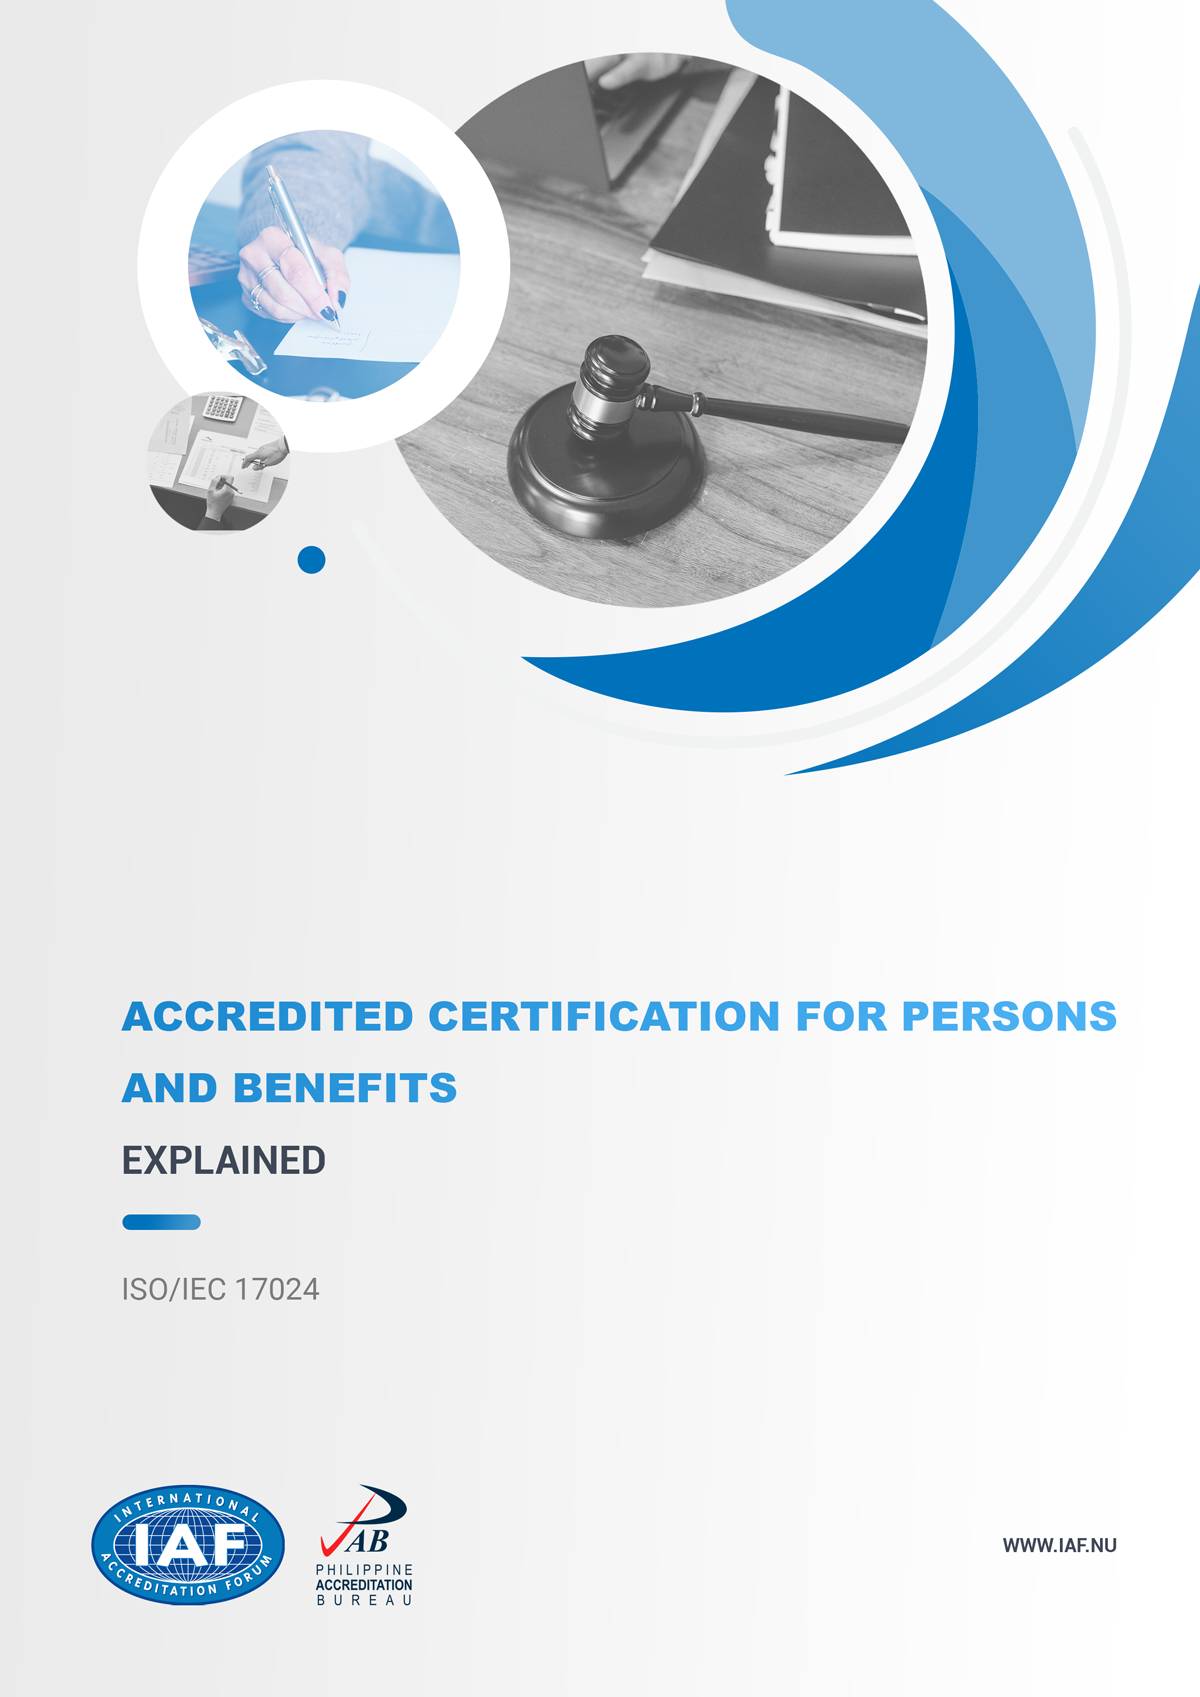 ACCREDITED CERTIFICATION FOR PERSONS AND BENEFITS EXPLAINED